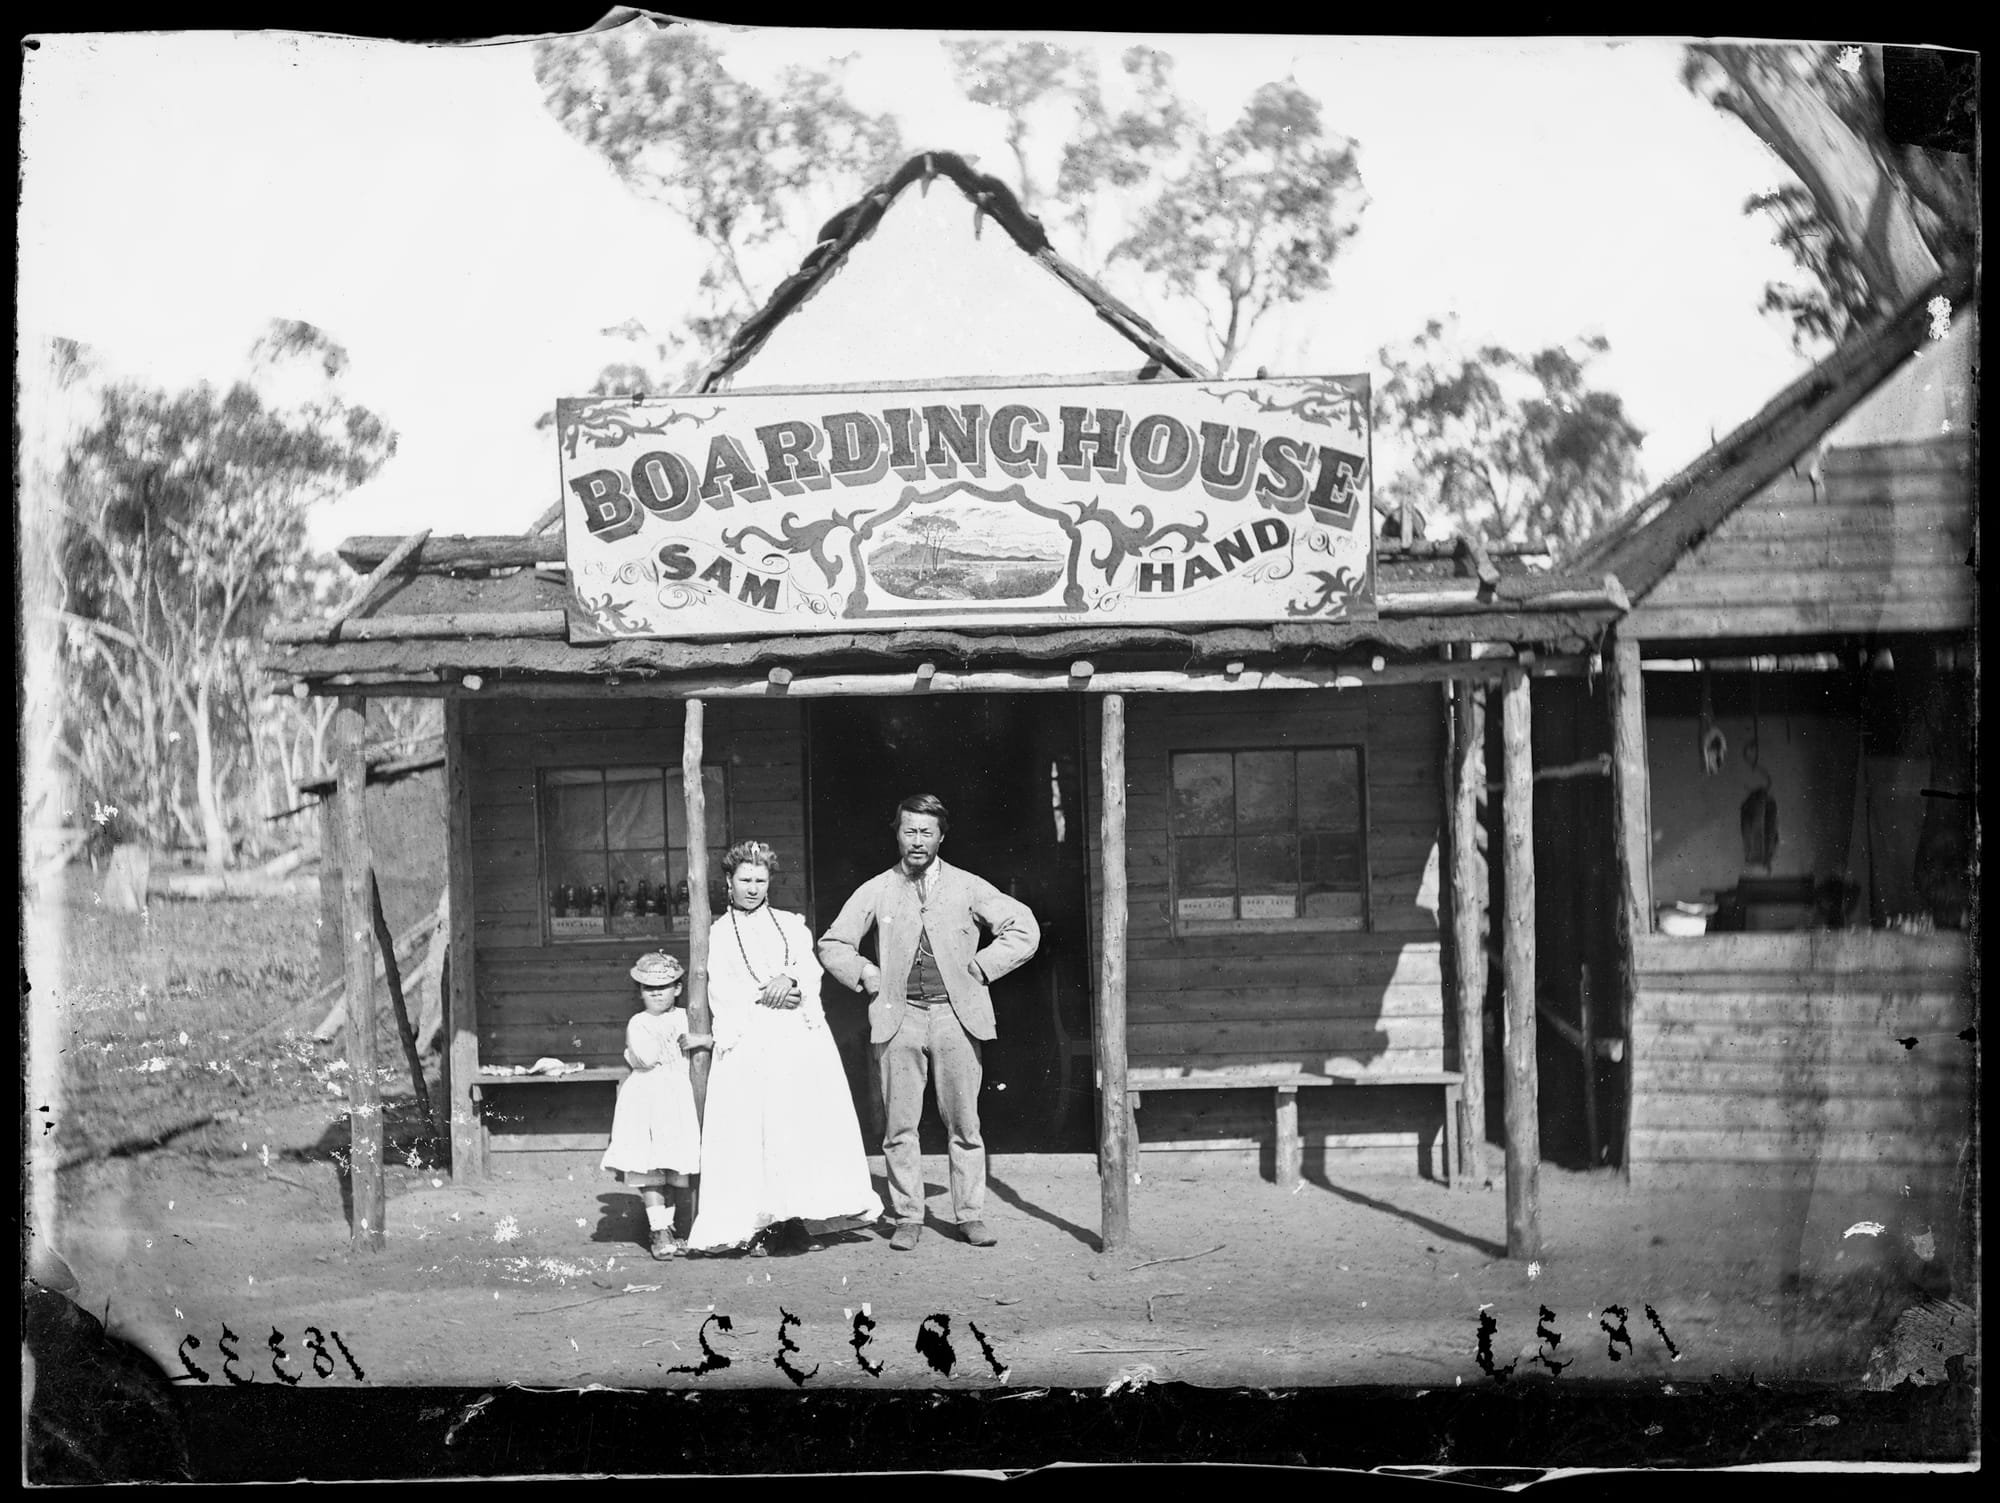 Family of three in smart clothes in front of a basic structure with a sign board for 'Boarding House, Sam Hand' mounted above the entranceway.